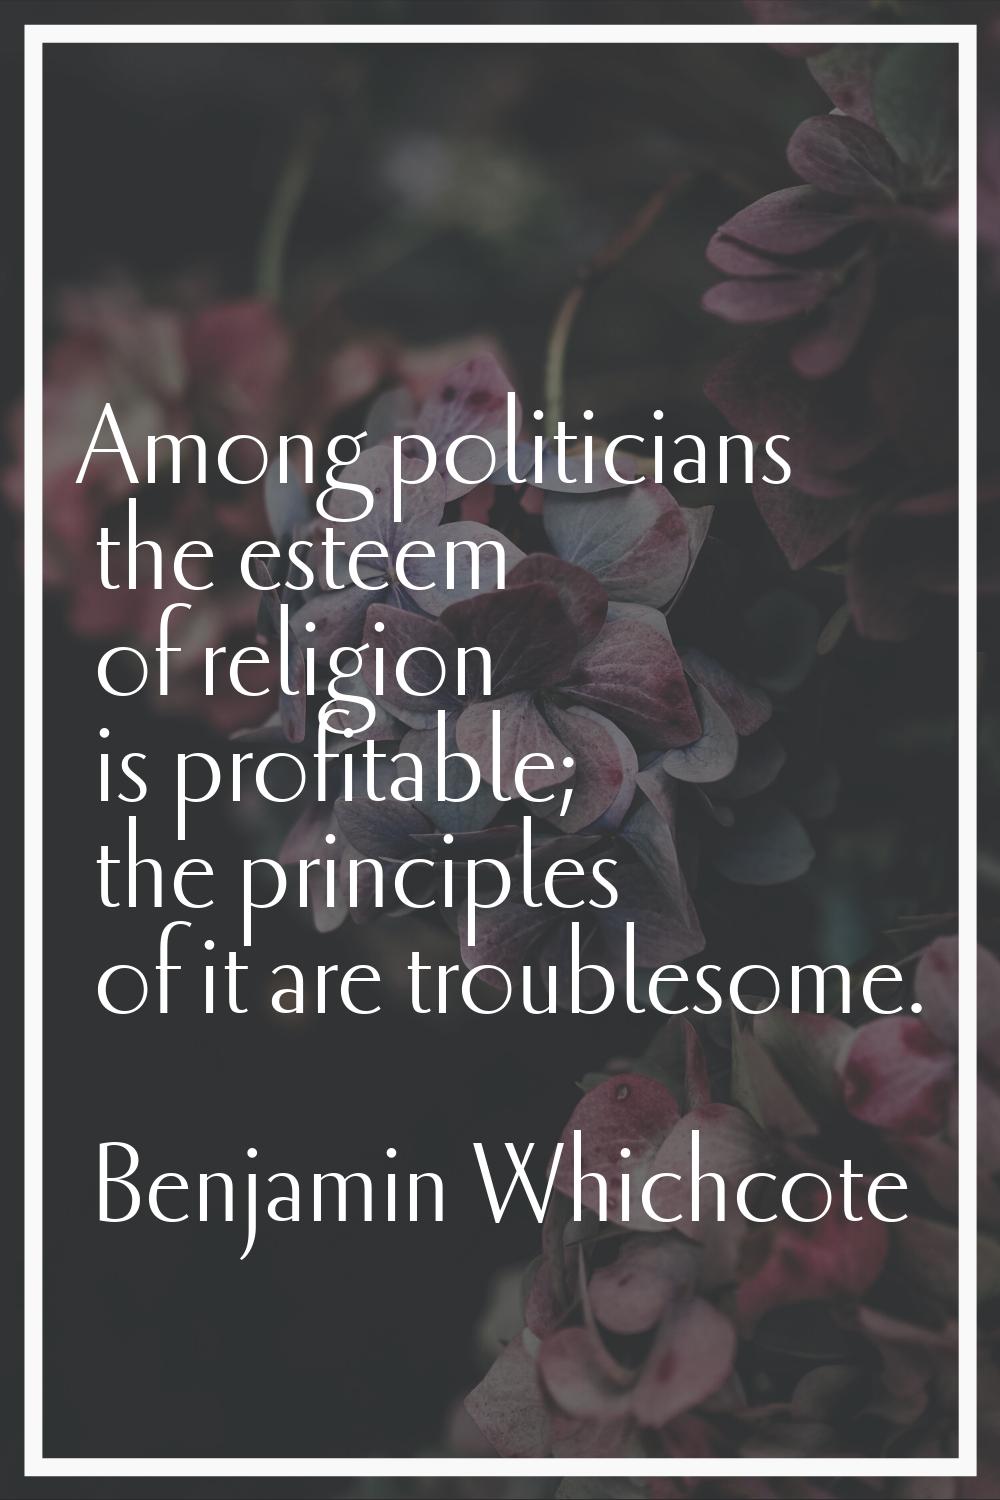 Among politicians the esteem of religion is profitable; the principles of it are troublesome.